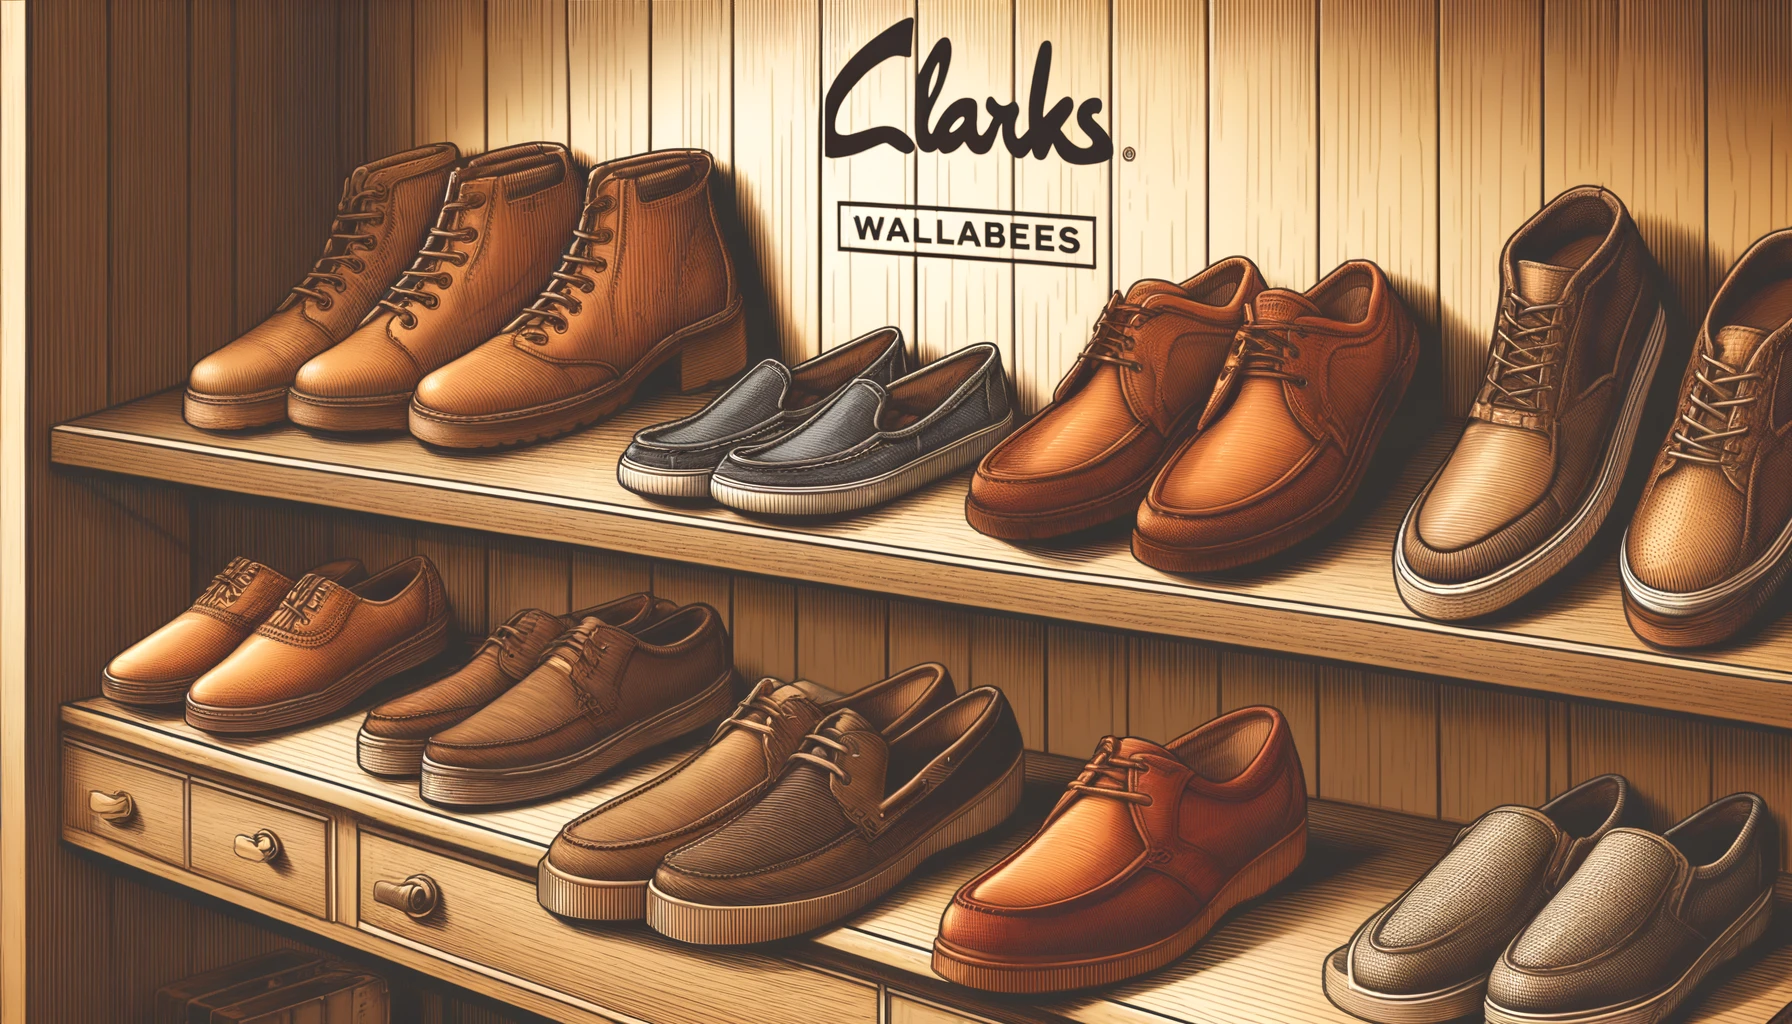 A detailed illustration of various models of Clarks Wallabees shoes, featuring different styles and colors neatly displayed on a wooden shelf in a boutique store. The image should have a sophisticated and modern look with the text 'Clarks' elegantly displayed in the corner. The setting is warmly lit to highlight the texture and quality of the shoes. The image composition should be horizontal with an aspect ratio of 16:9.